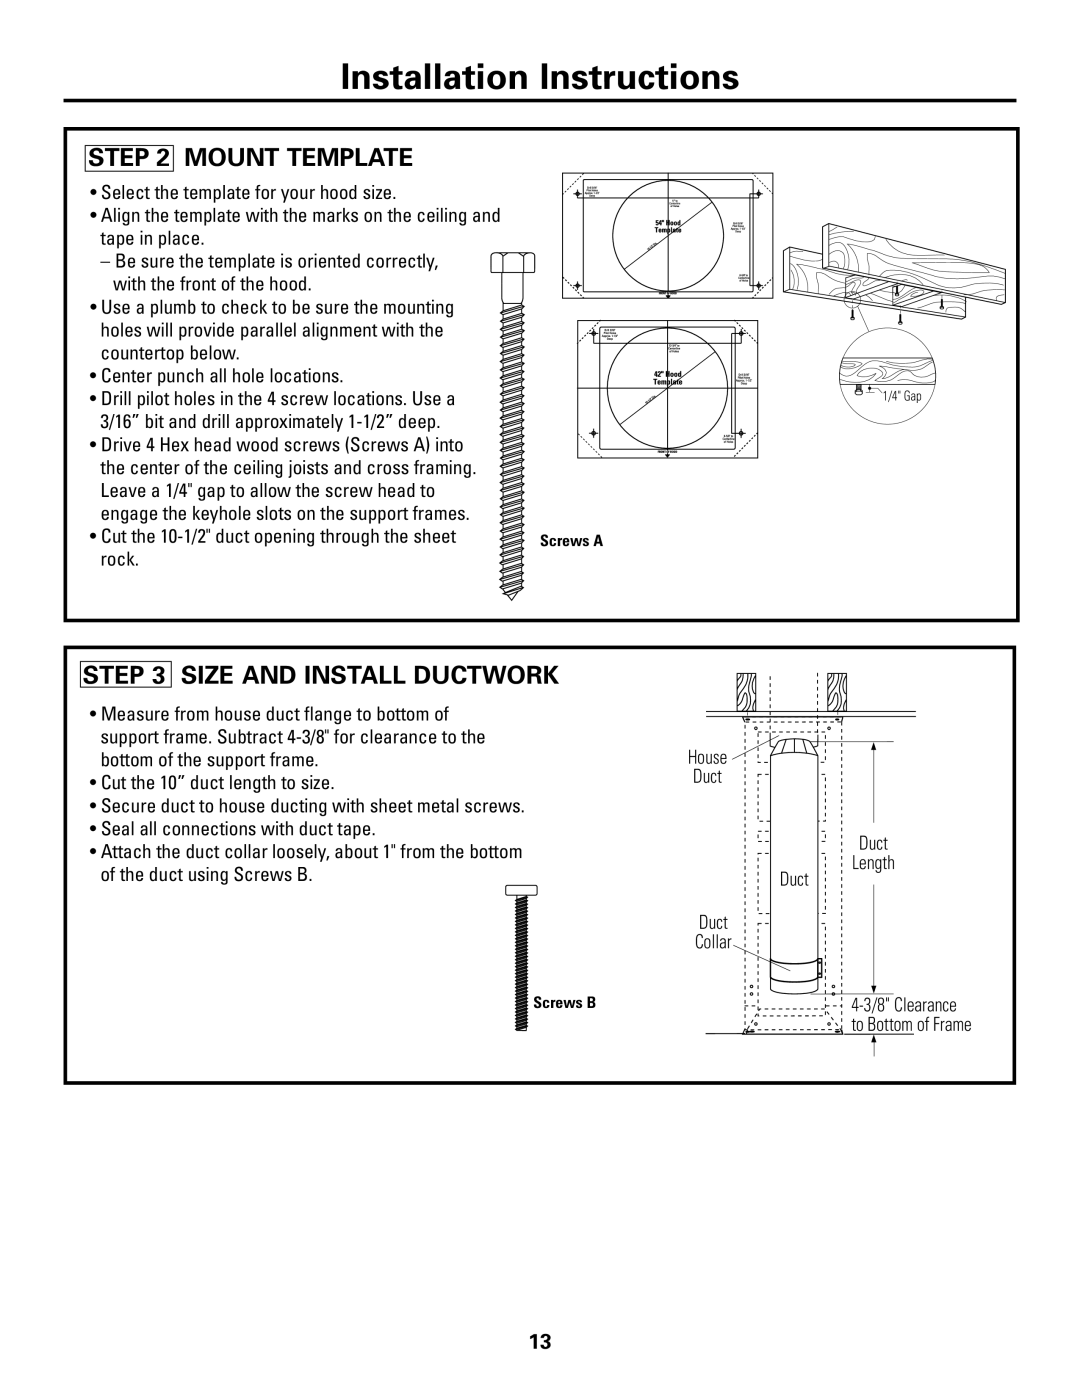 GE ZV421, ZV541 installation instructions Mount Template, Size And Install Ductwork, Installation Instructions 